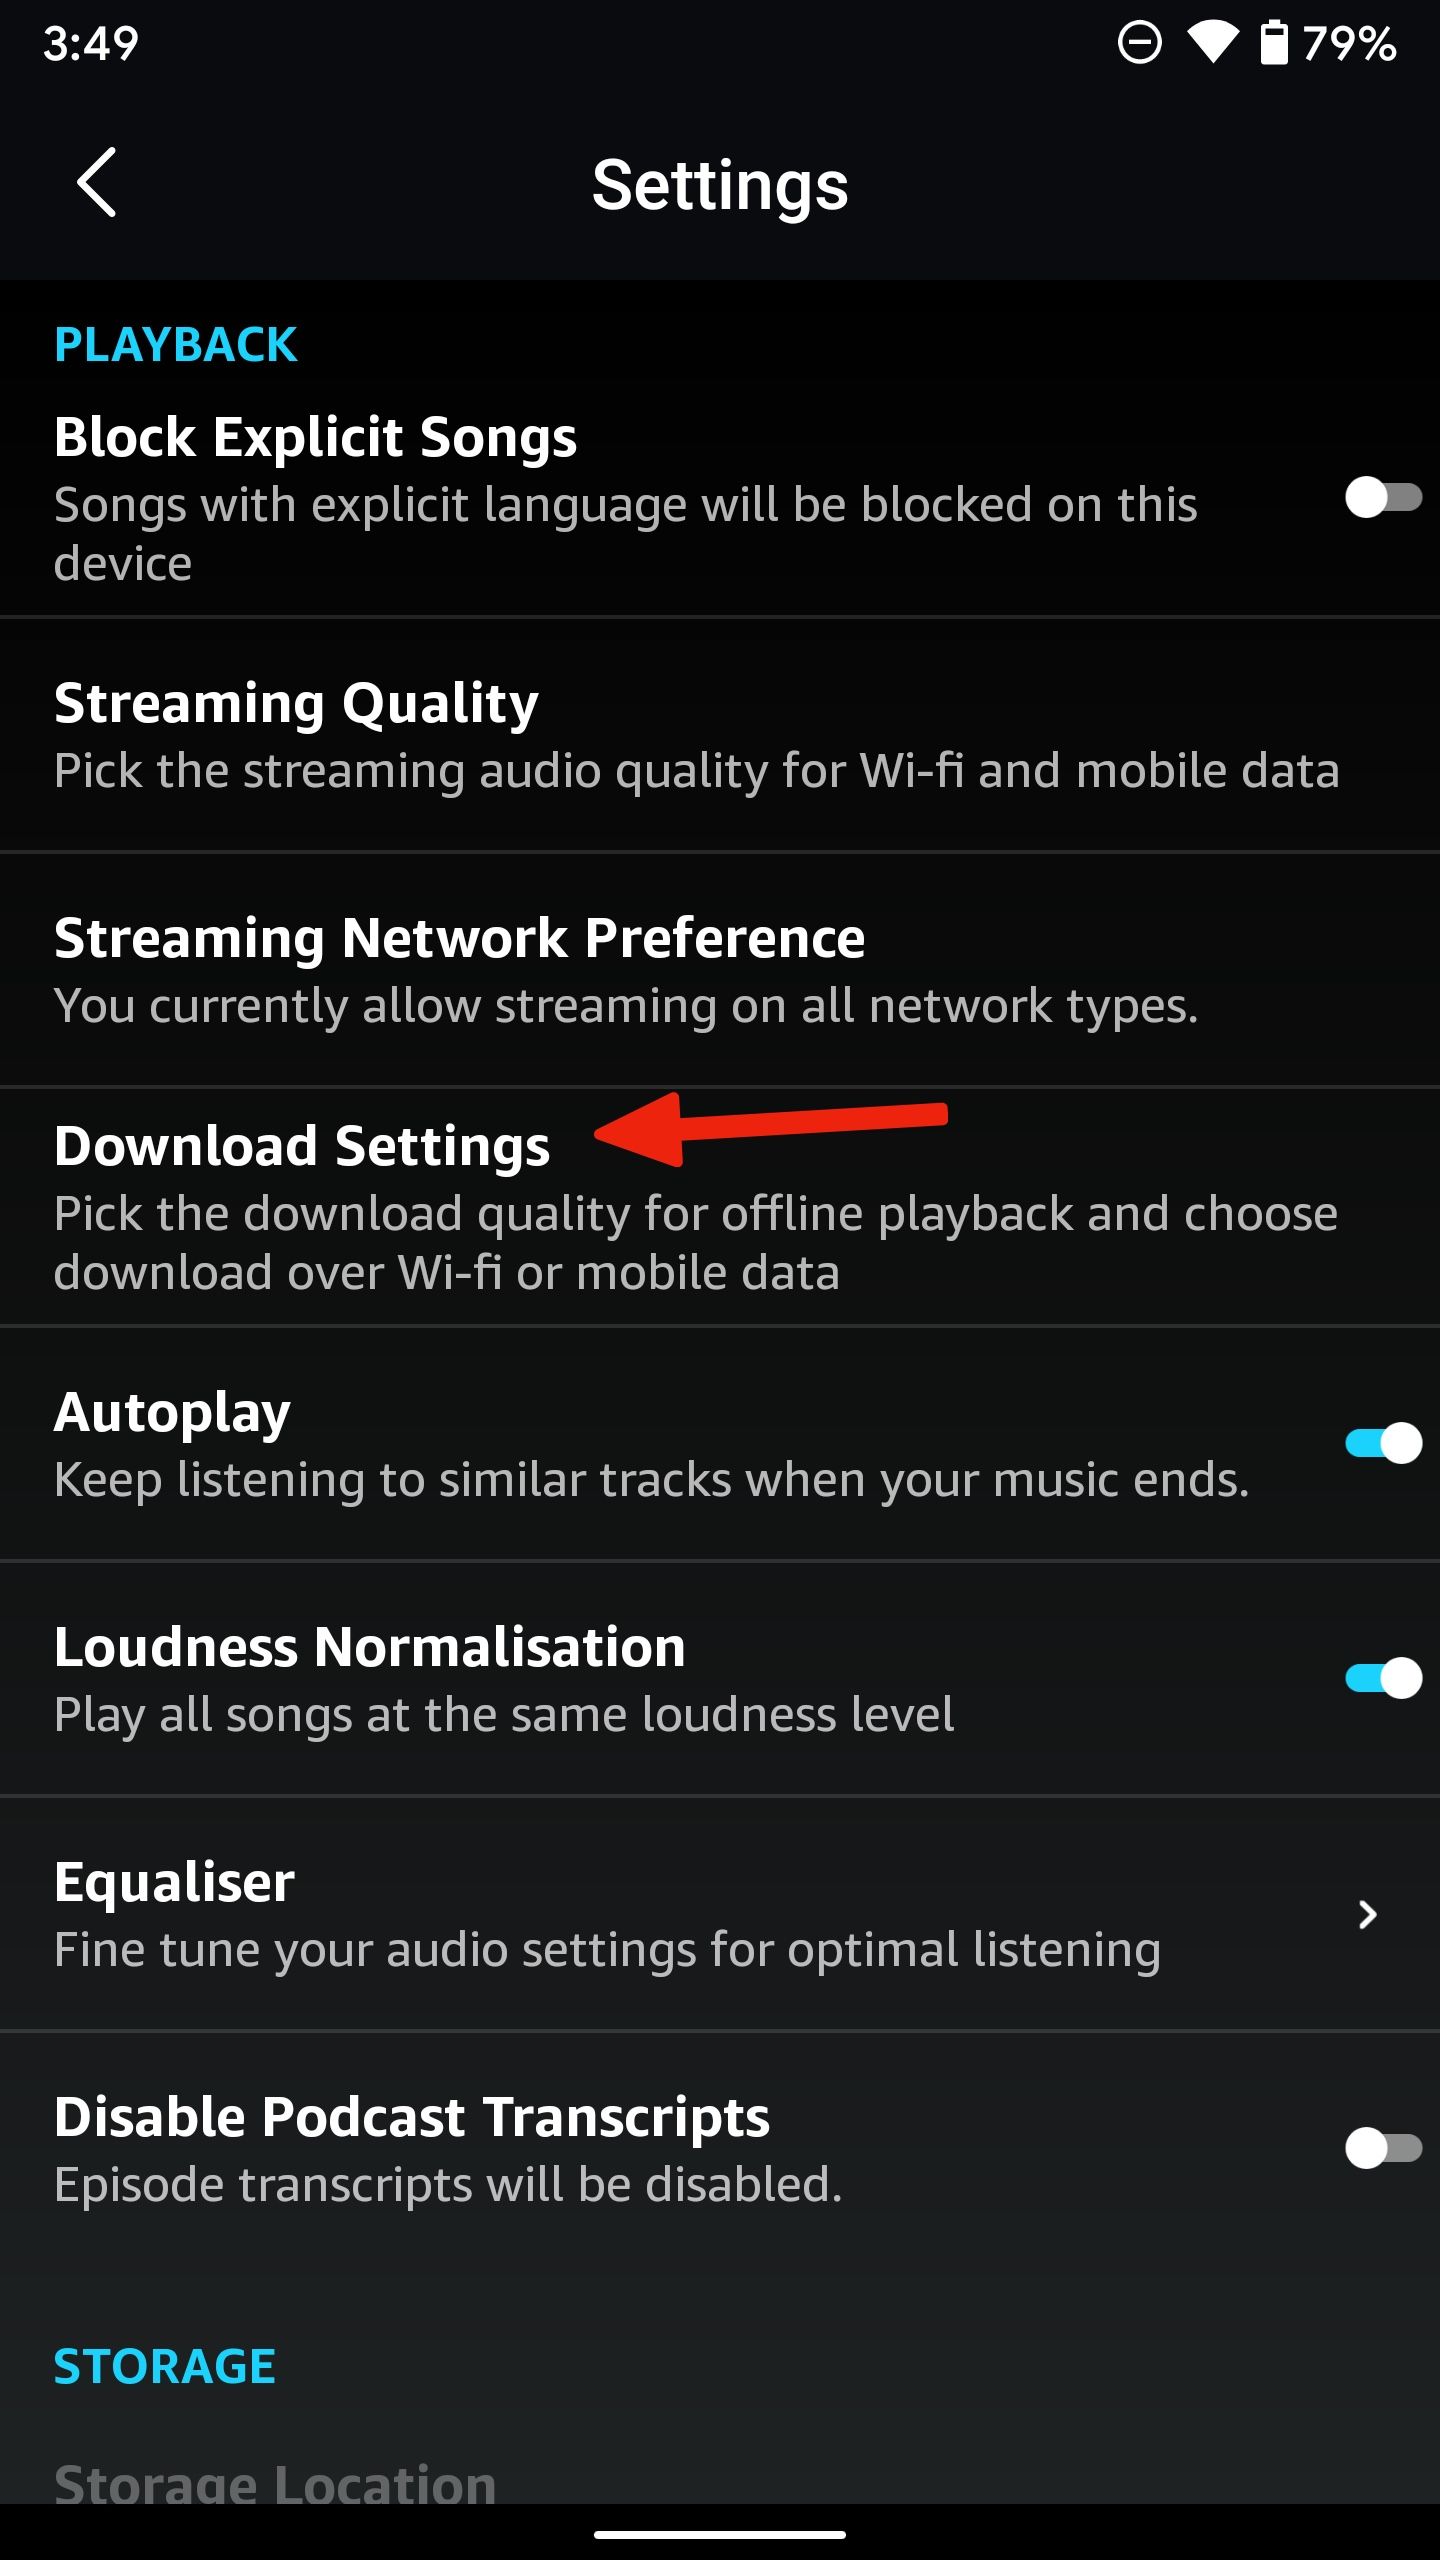 Settings page in the Amazon Music app with an arrow pointing to 'Download Settings'.